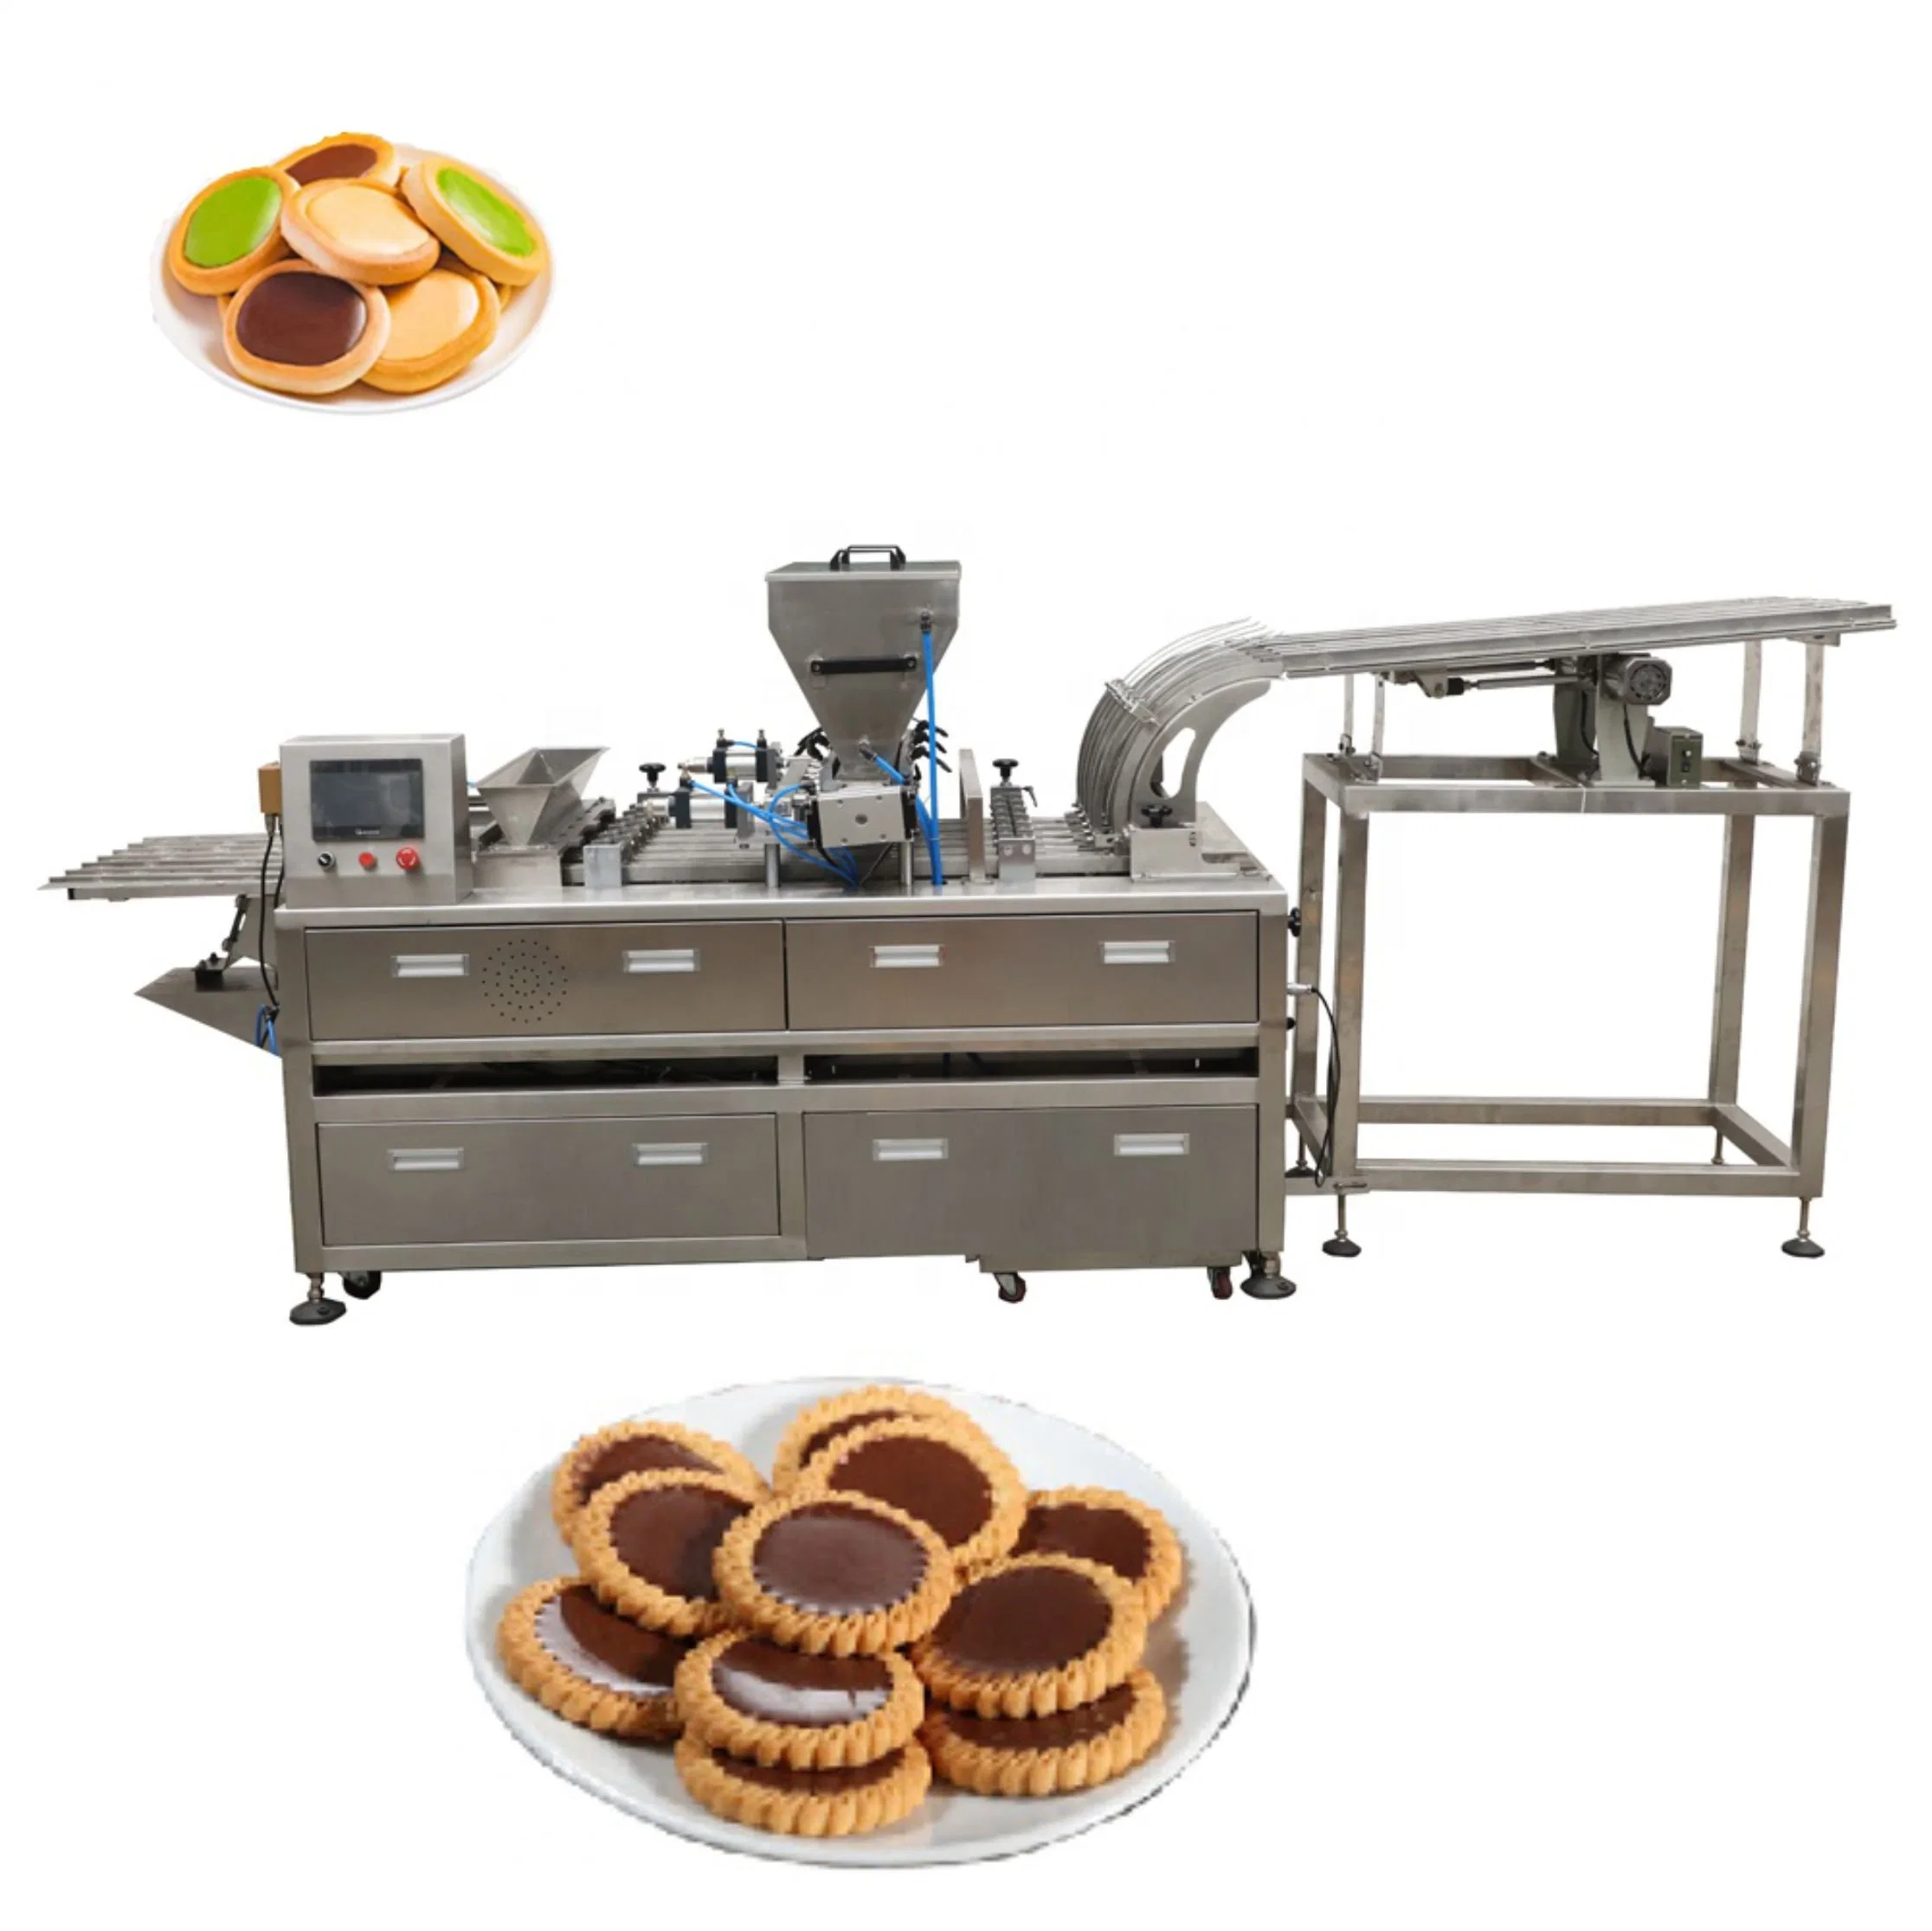 New Product Chocolate and Jam Depositing Depositor Machine to Make Tartlets for Bakery Factory Price